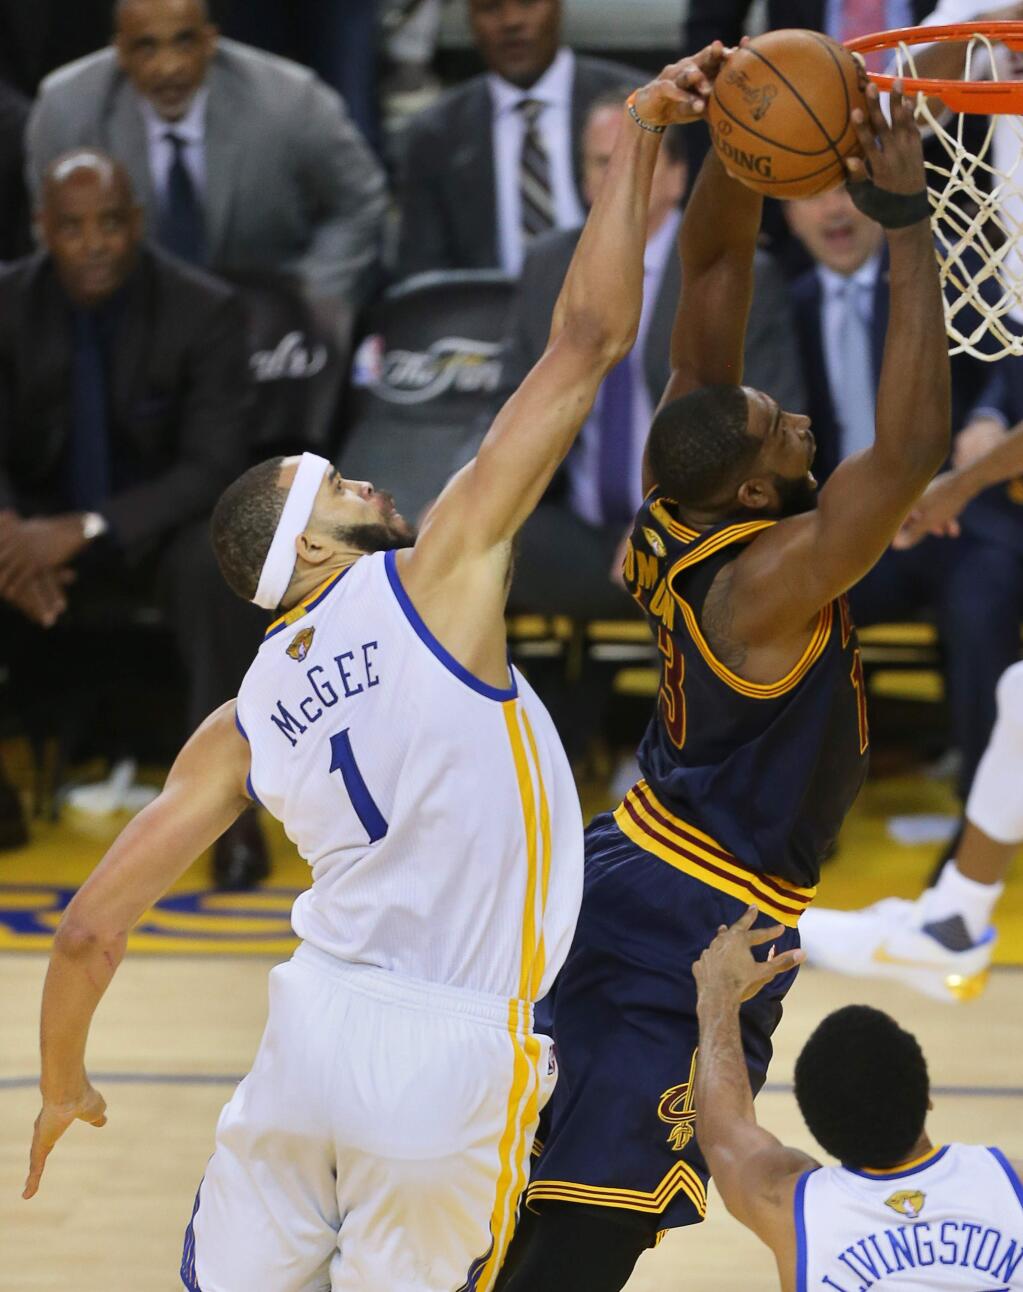 Golden State Warriors center JaVale McGee blocks a shot attempt by Cleveland Cavaliers center Tristan Thompson during Game 1 of the NBA Finals in Oakland on Thursday, June 1, 2017. The Warriors defeated the Cavaliers 113-91. (Christopher Chung / The Press Democrat)